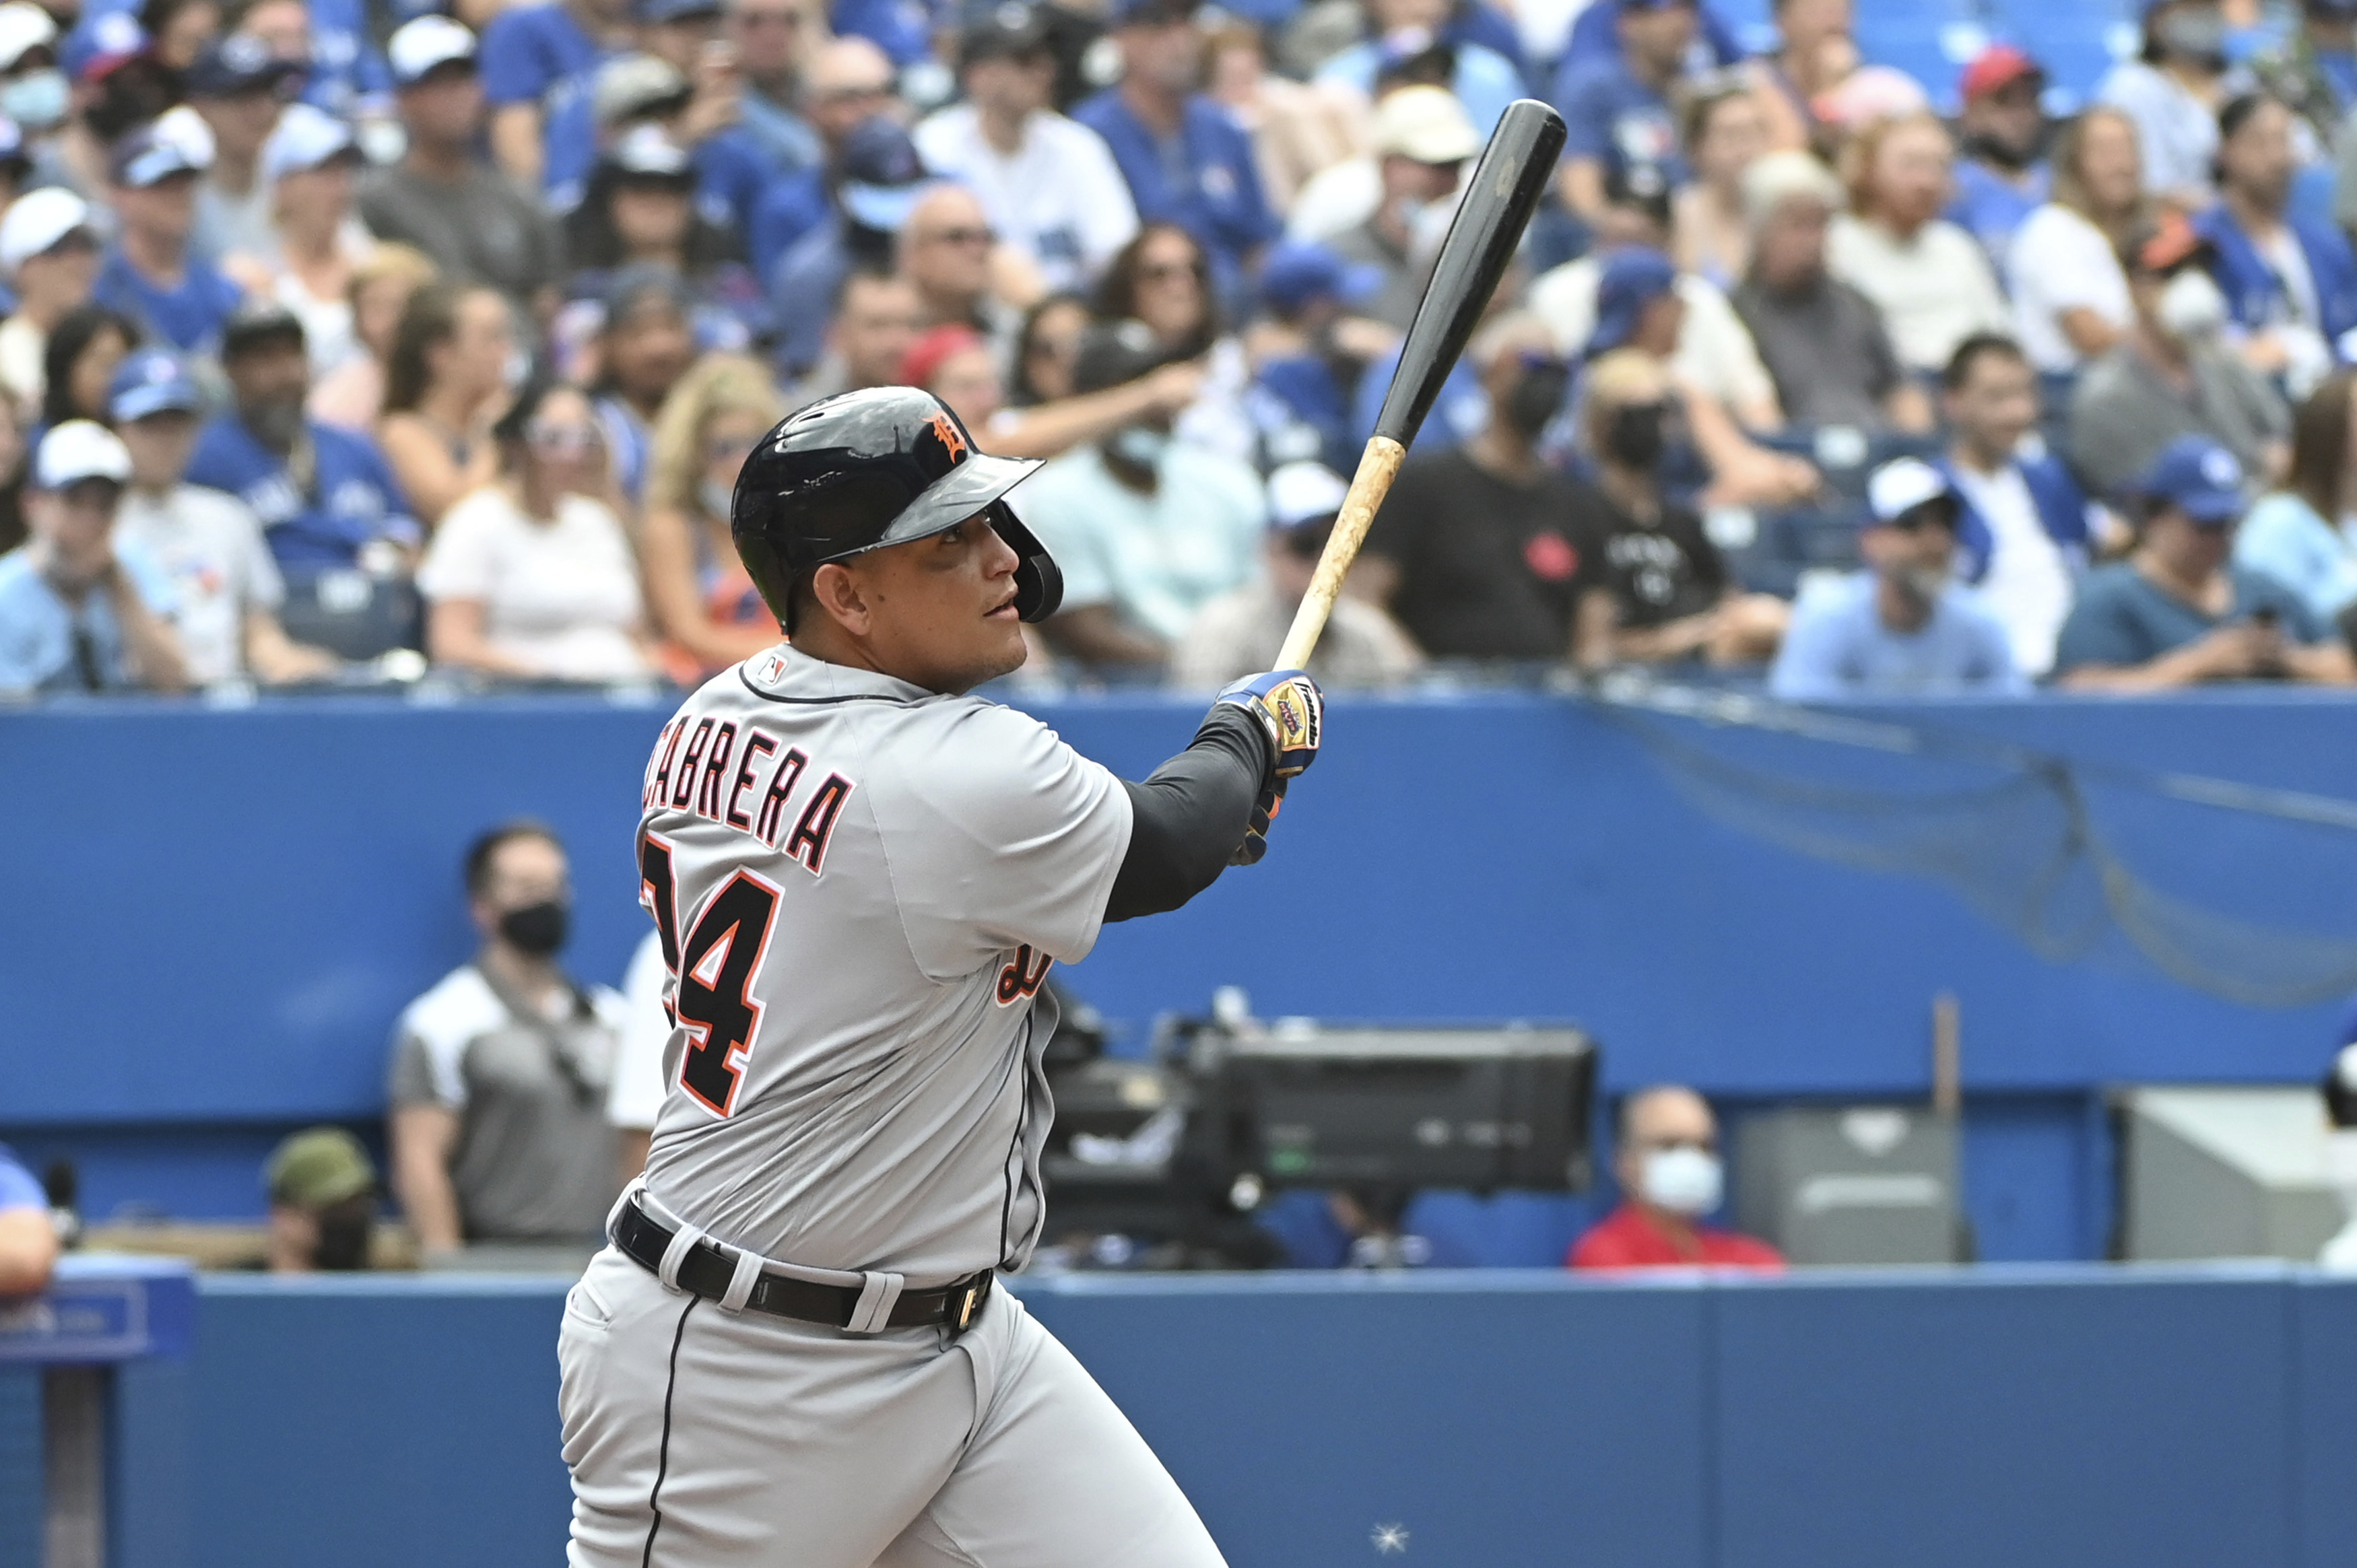 Remembering Miguel Cabrera's first big league home run - DRaysBay